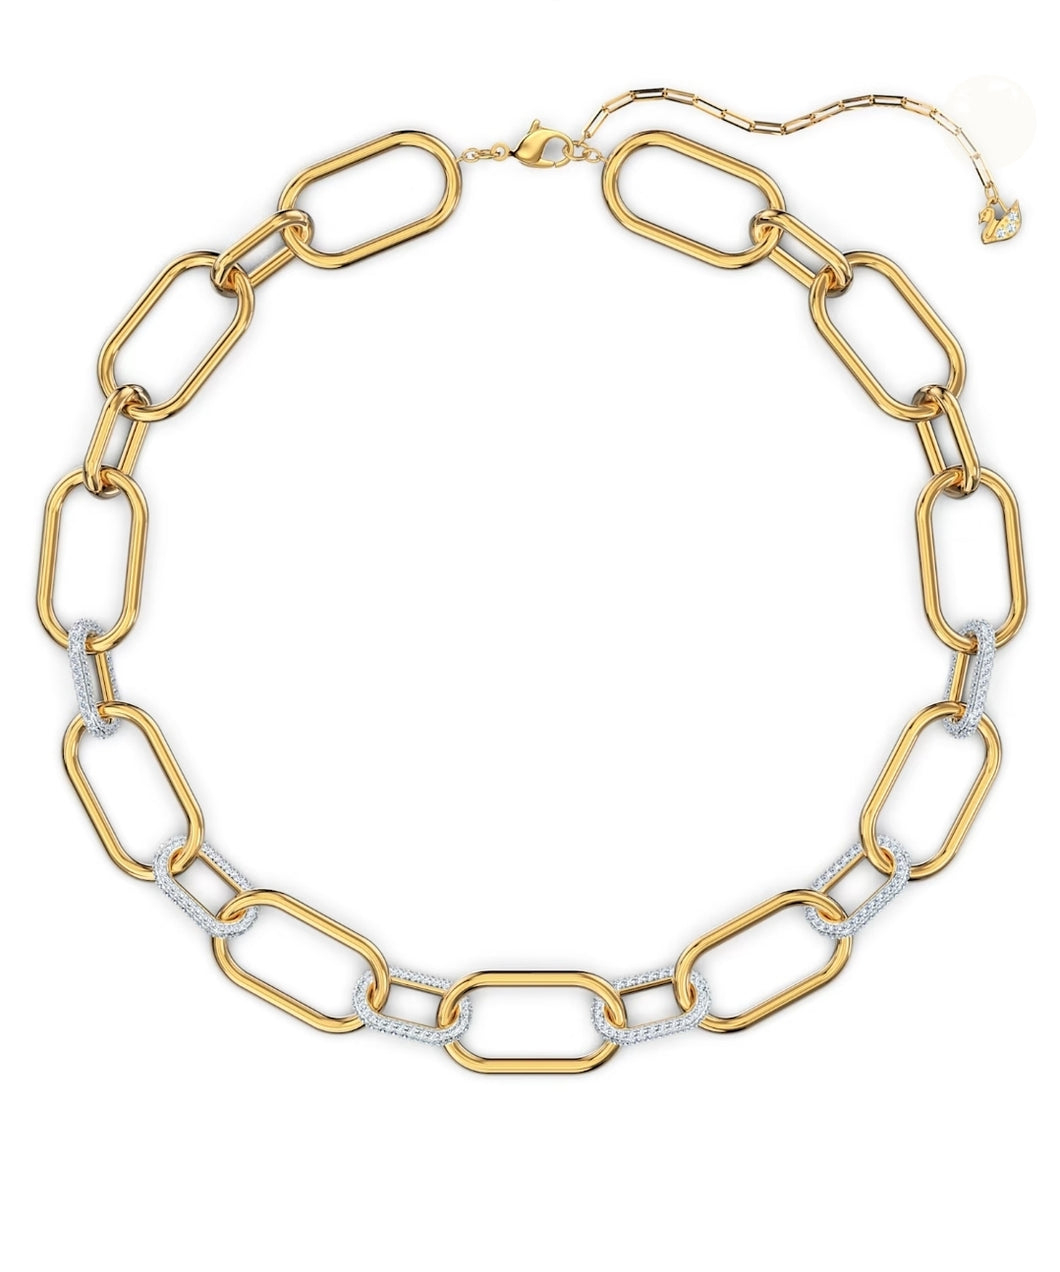 A celebration of femininity and modern design, this Swarovski necklace draws inspiration from the hardware trend. Two elongated chain links holding onto each other – one shimmering softly, one covered in clear crystal pavé – take center stage.